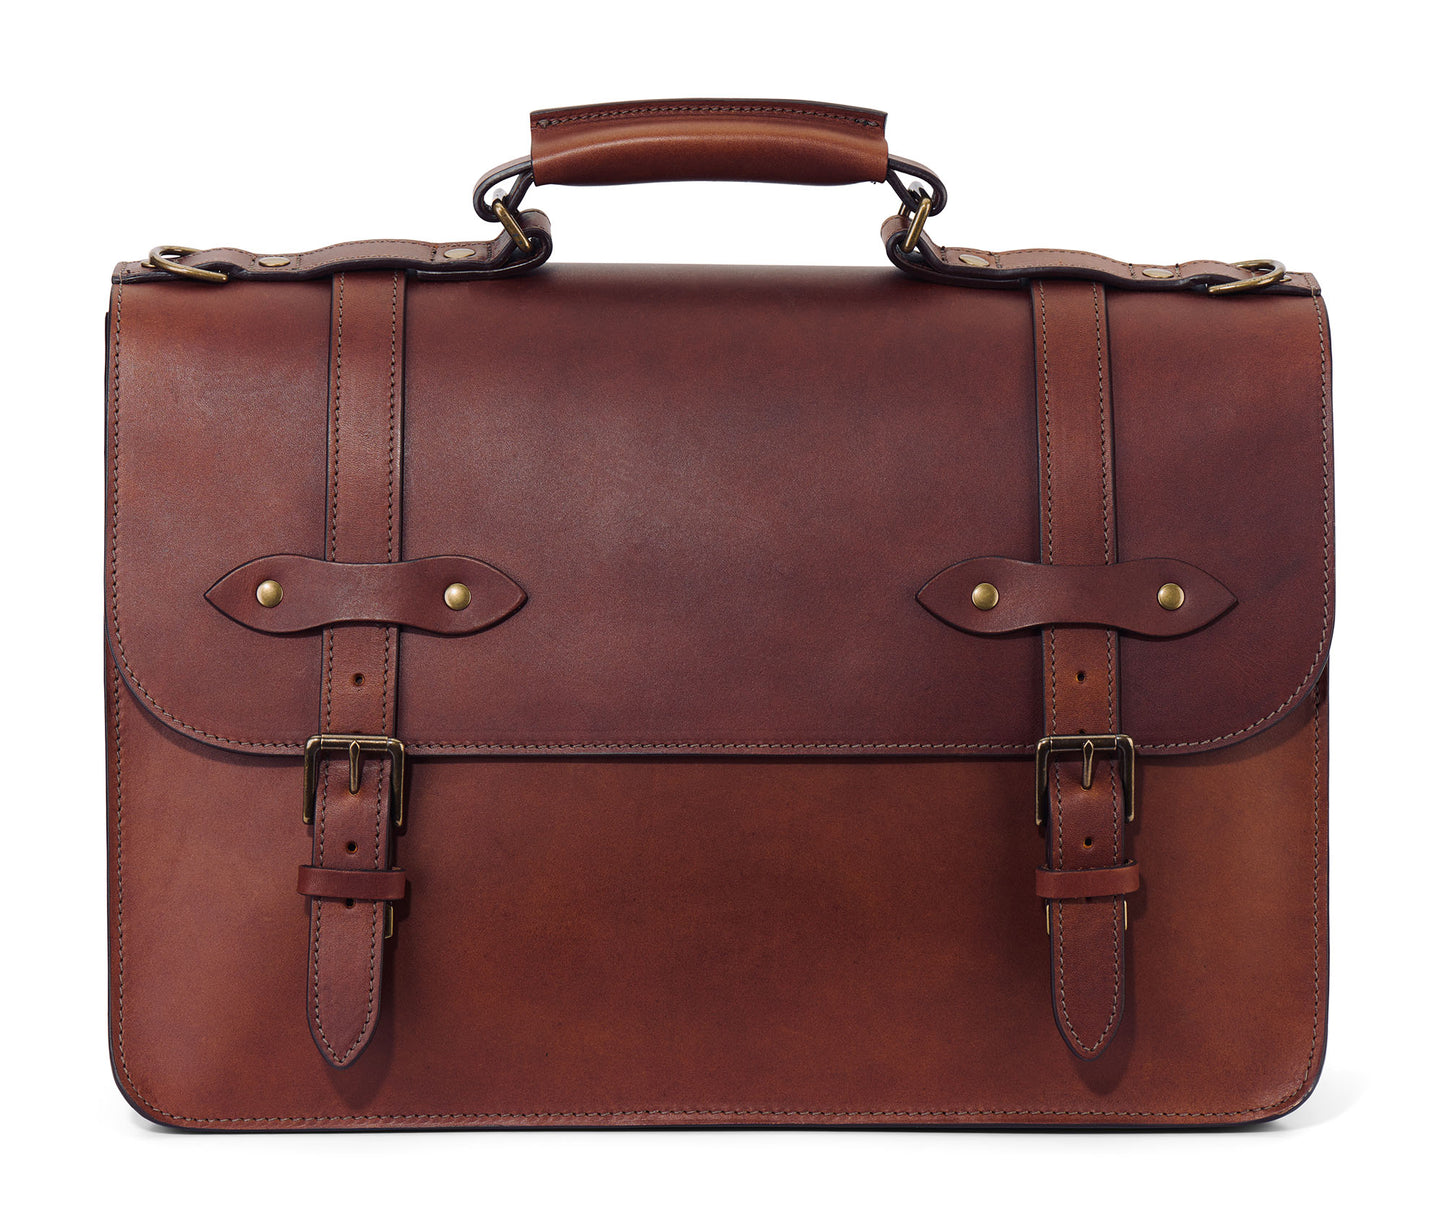 Esq. Briefcase by Jackson Wayne made of full grain semi-vegetable tanned leather front view in vintage brown color - a classic vintage design lawyer's briefcase